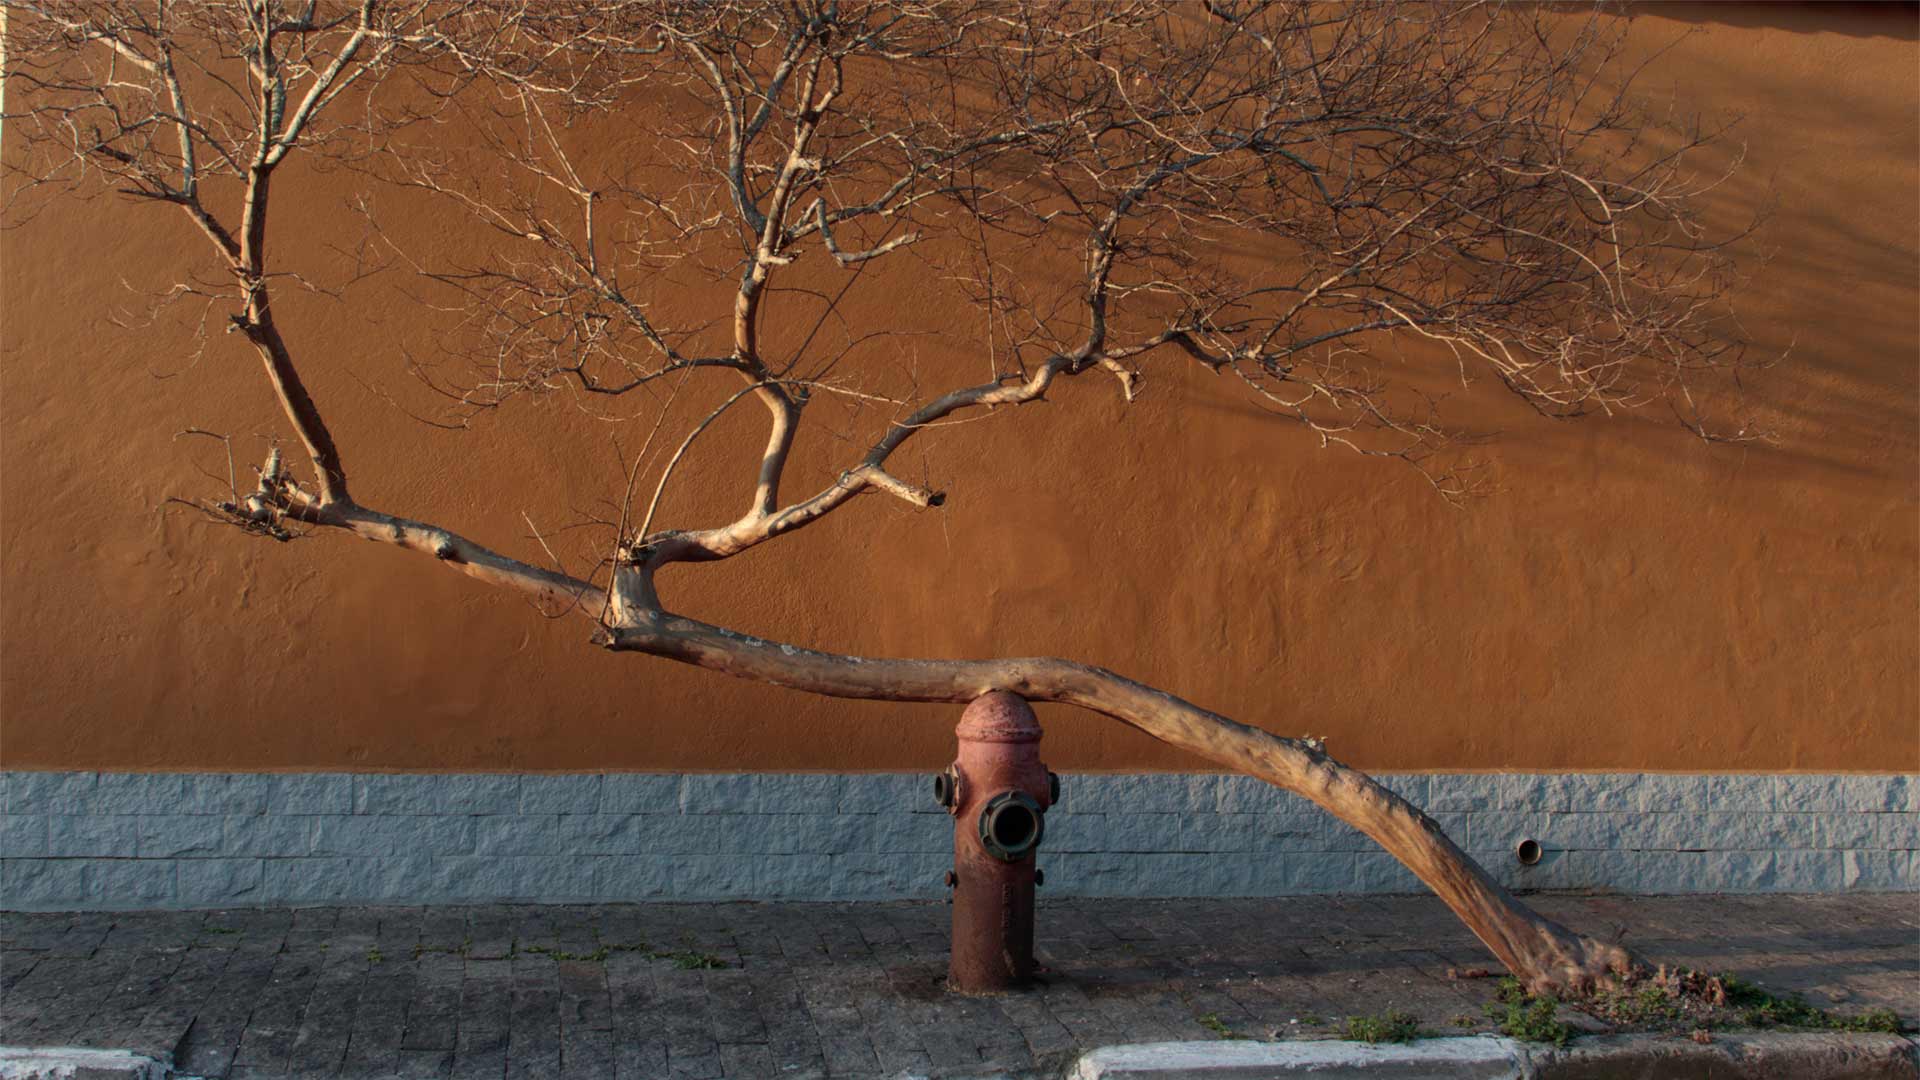 Guava tree standing on a red fire hydrant